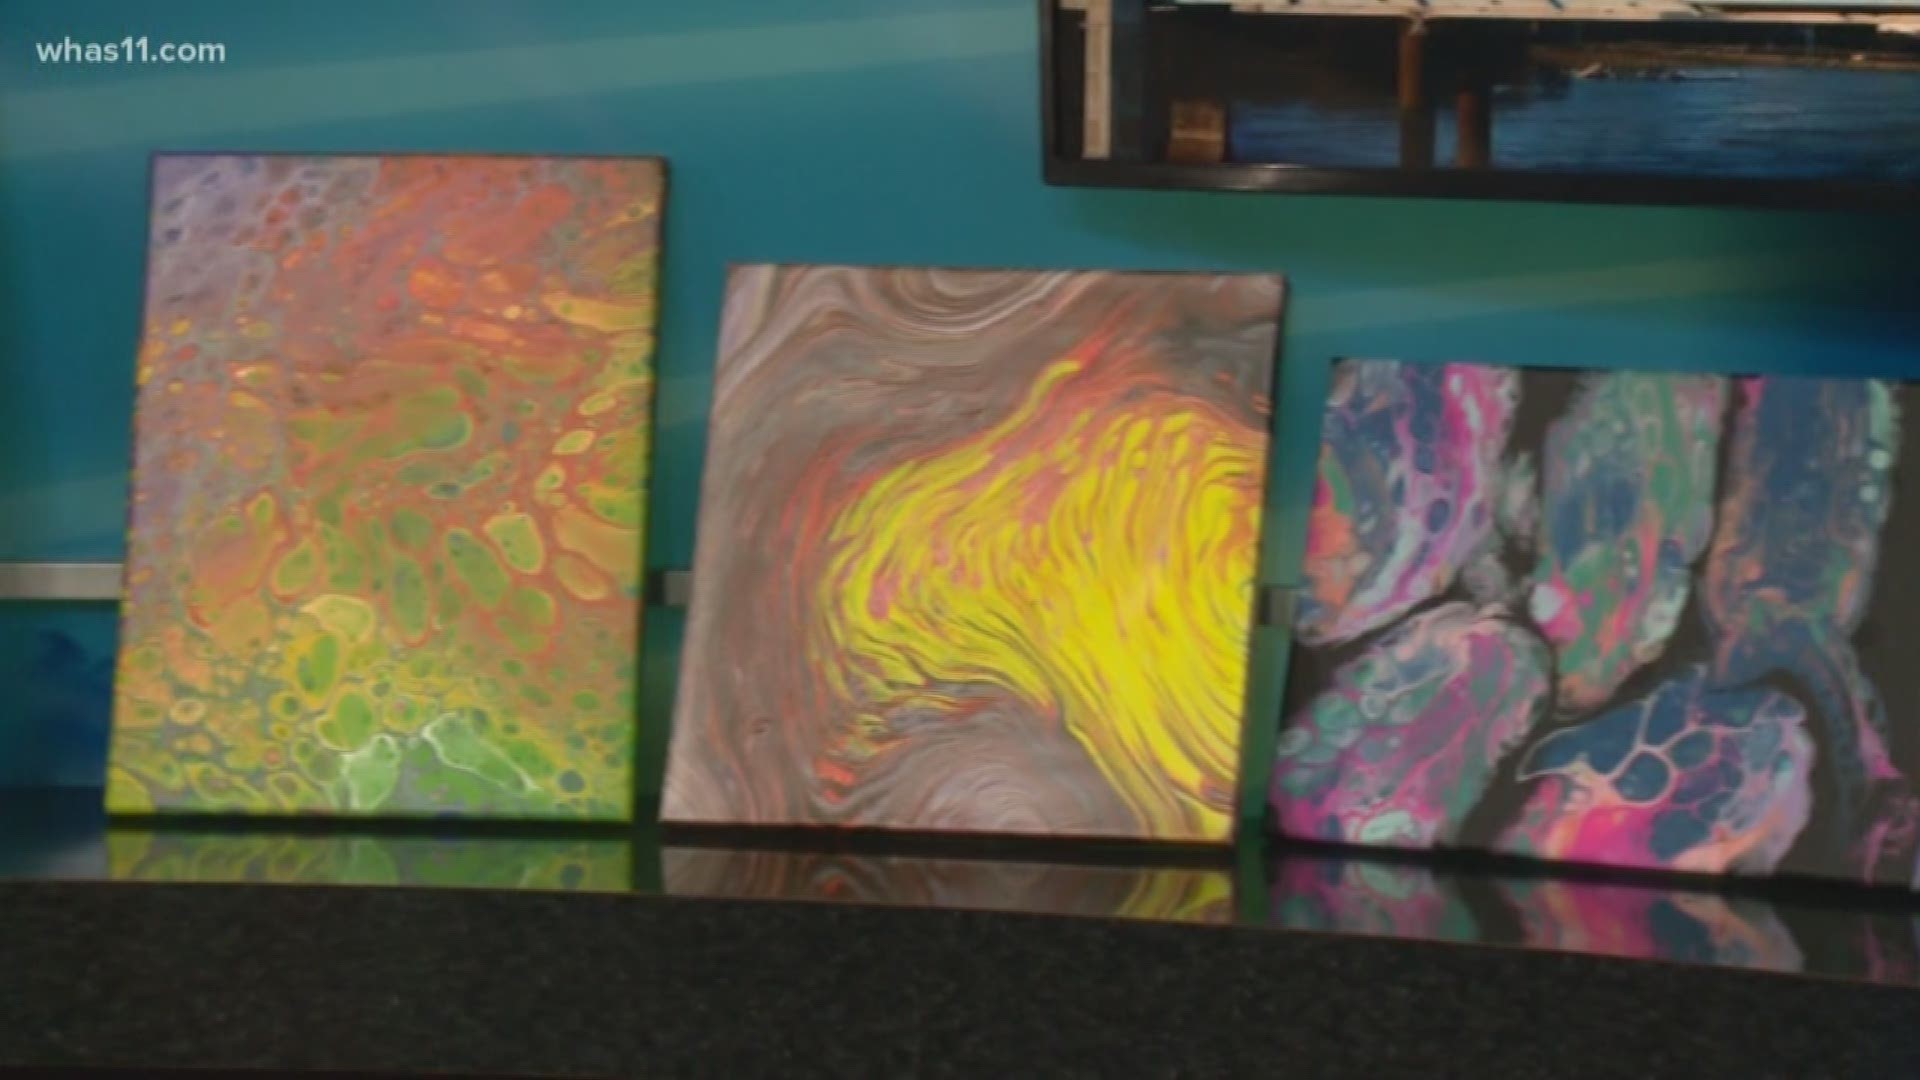 Mikayla Harbeson does acrylic paint pouring and has made about $600 in sales this year.